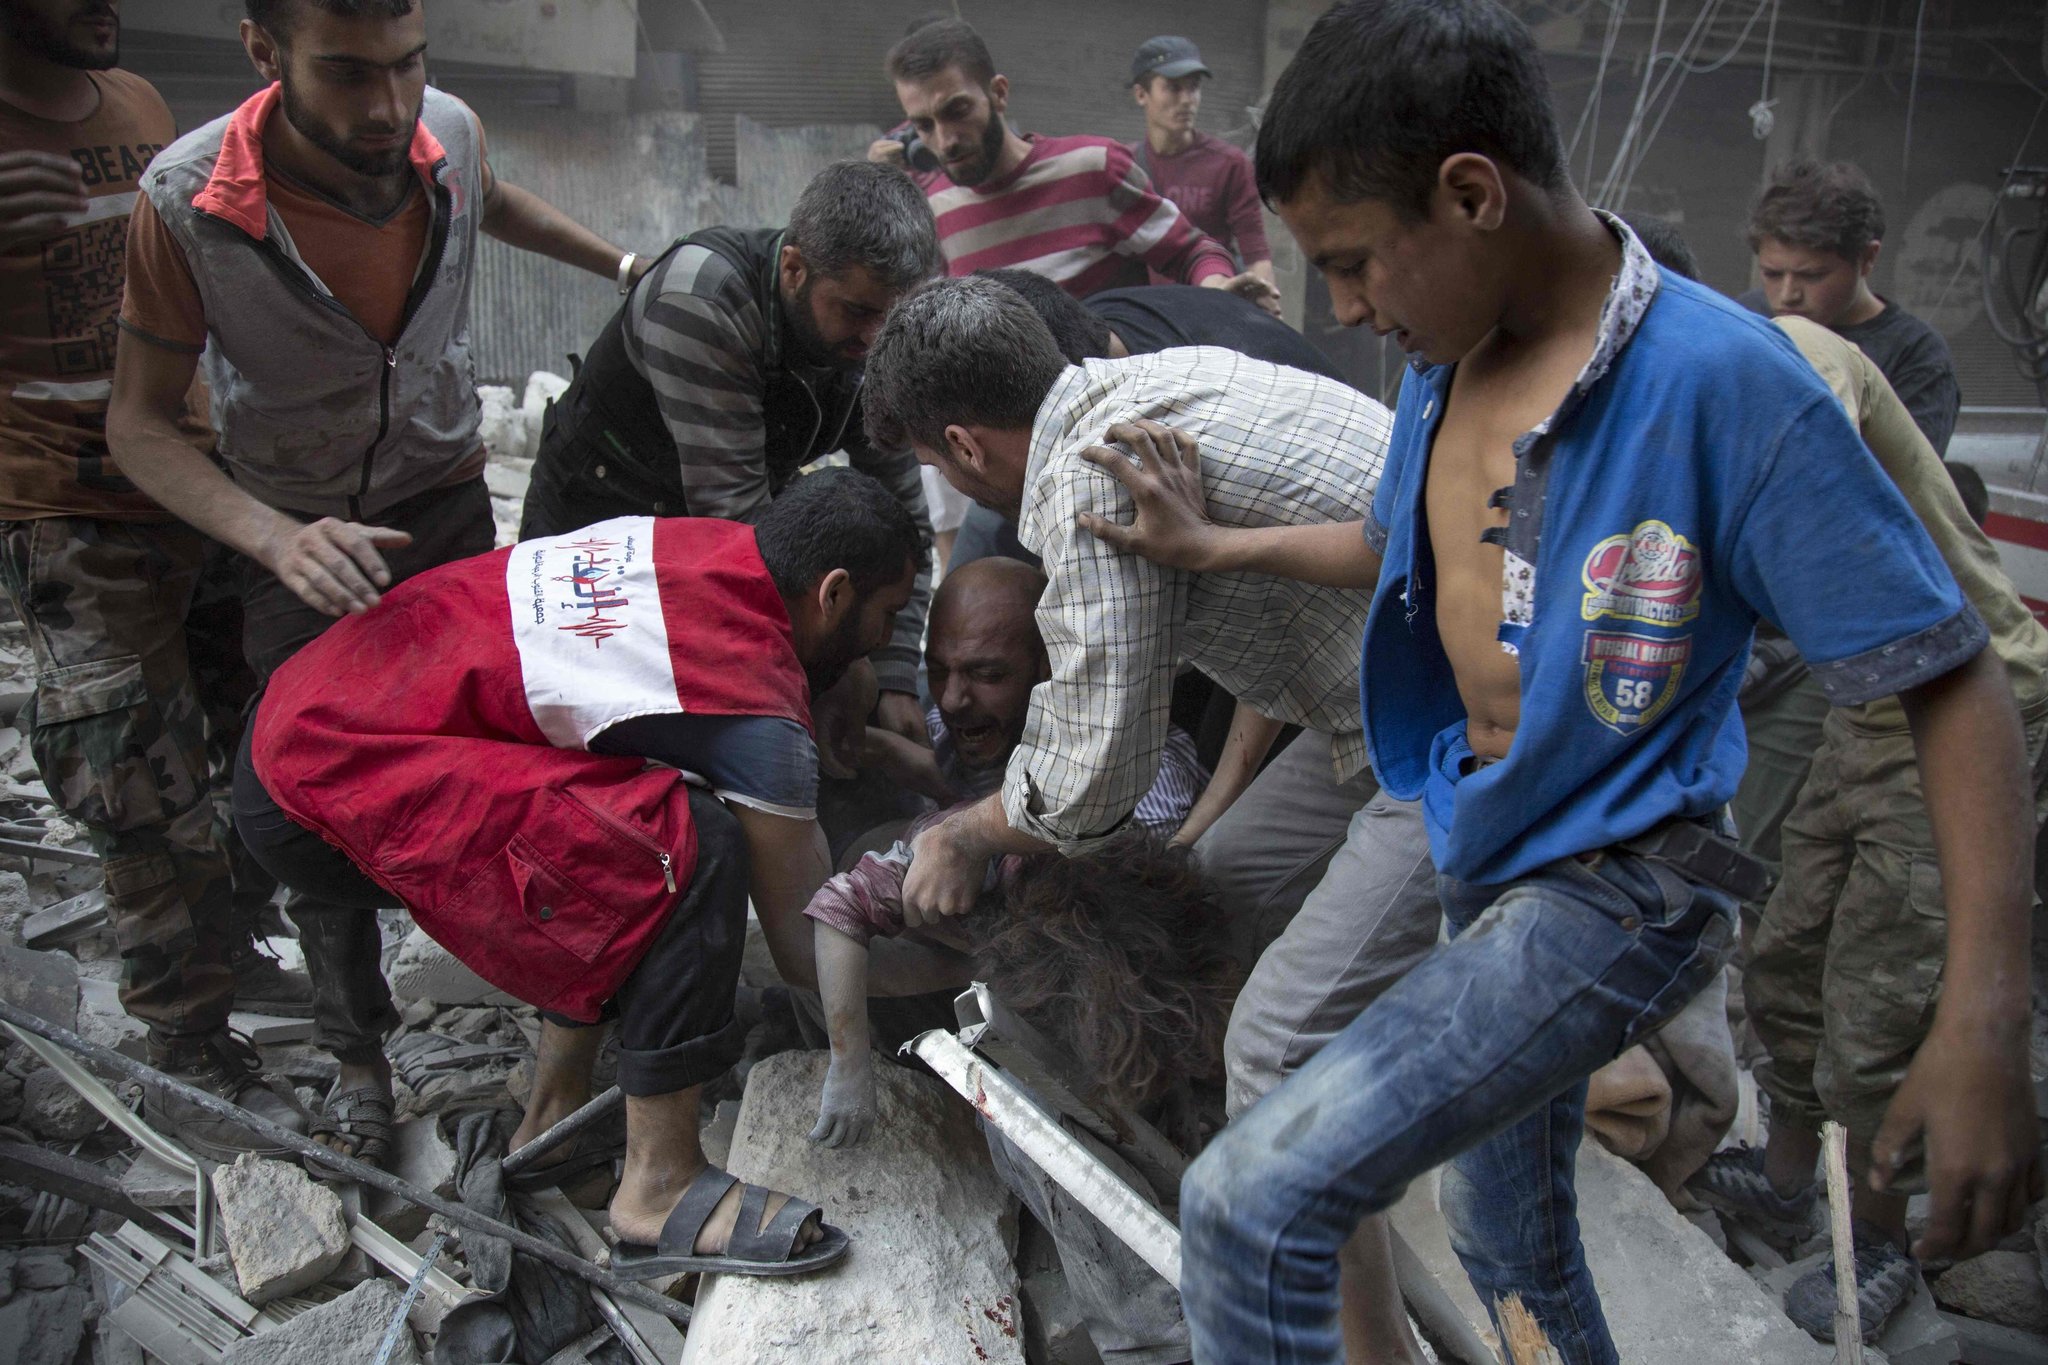 A man crying over the body of his child after she was pulled from the rubble of a building following government airstrikes Tuesday on a rebel-held neighborhood in Aleppo. Credit Karam Al-Masri/Agence France-Presse — Getty Images